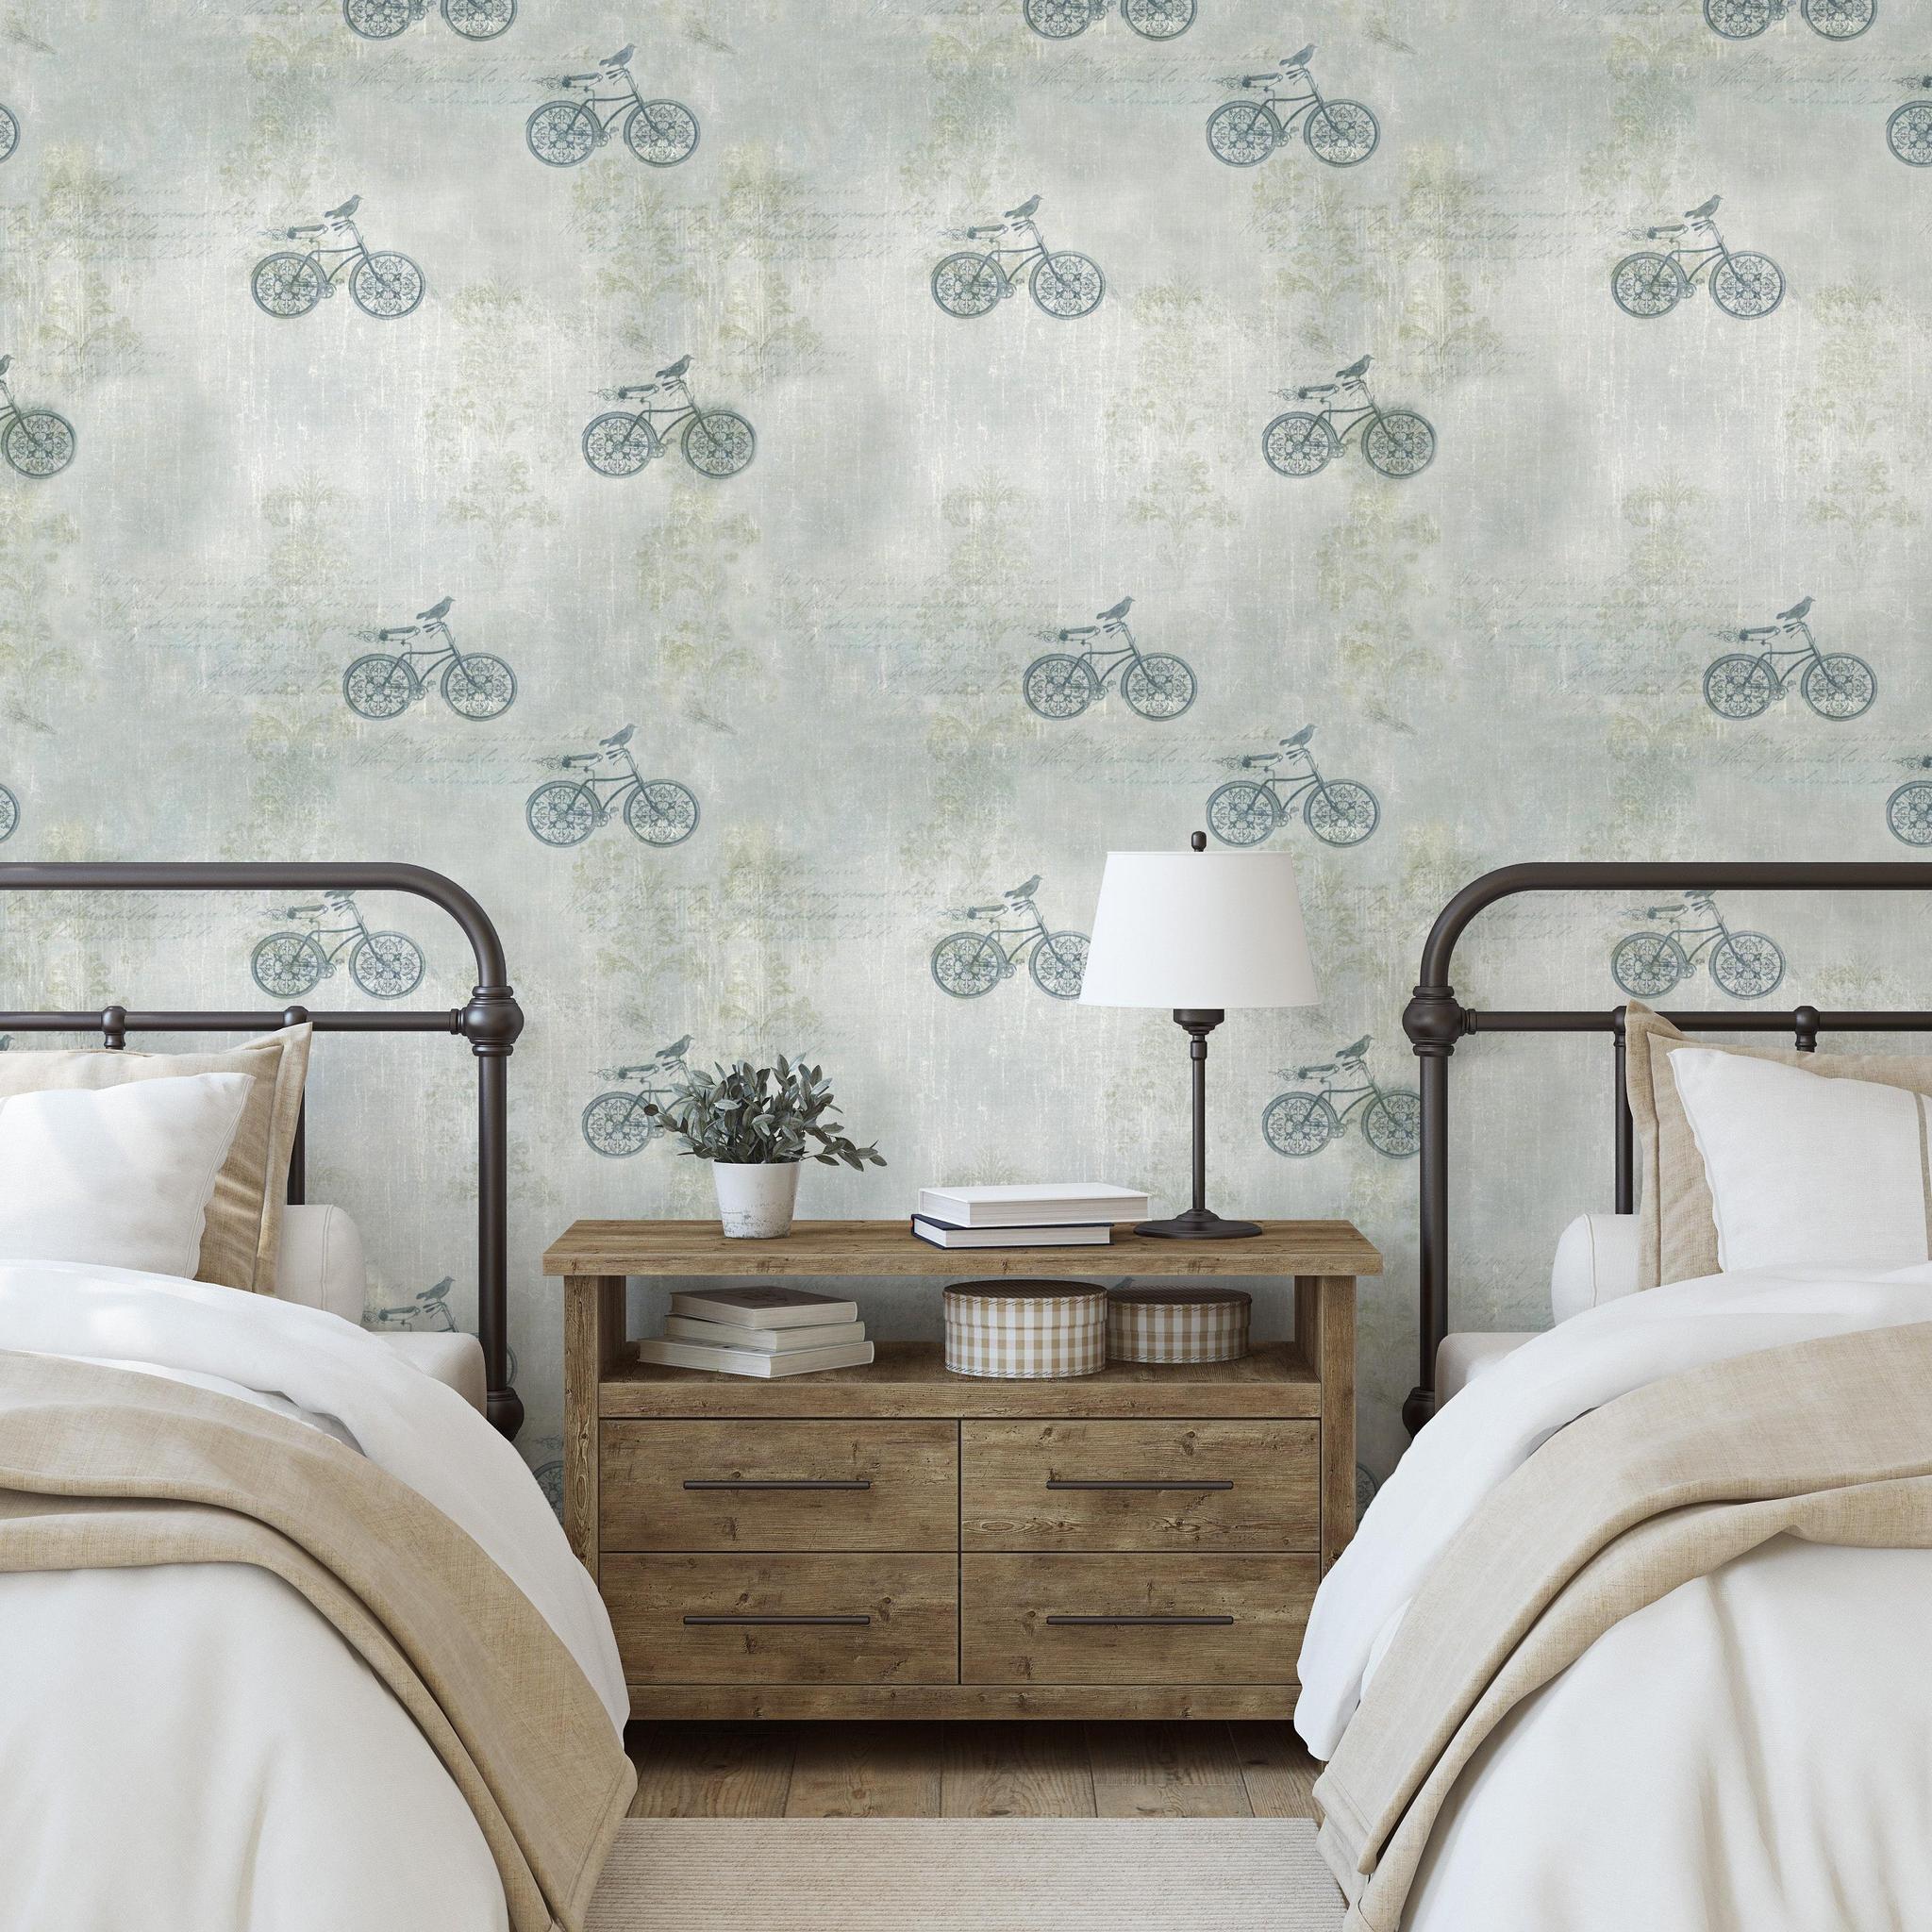 Blue J's Wallpaper by The 7th Haven Interiors Line in a well-appointed bedroom with vintage aesthetic focus.
